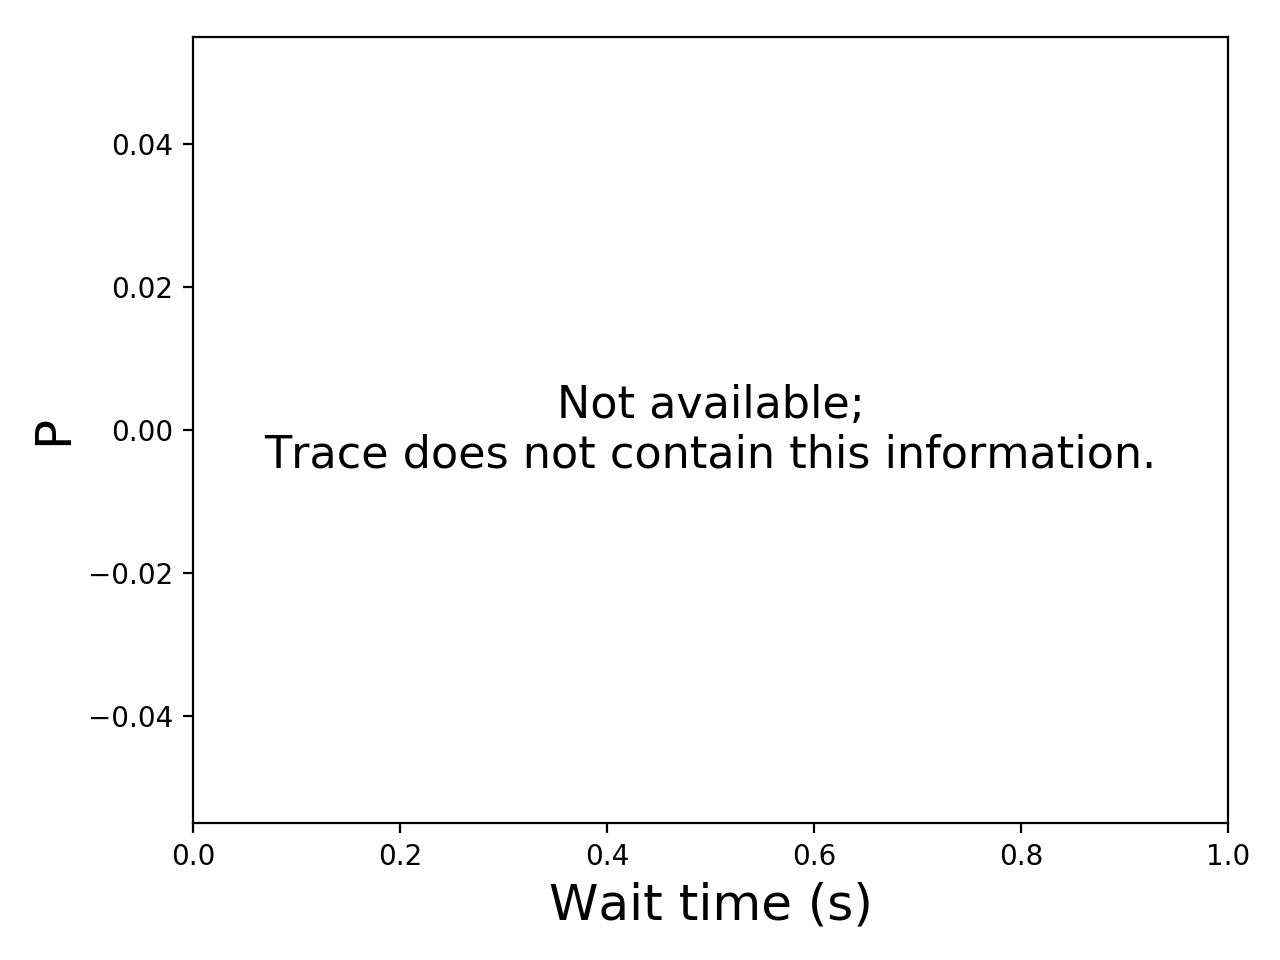 Task wait time CDF graph for the workflowhub_montage_ti01-971107n_degree-4-0_osg_schema-0-2_montage-4-0-osg-run009 trace.